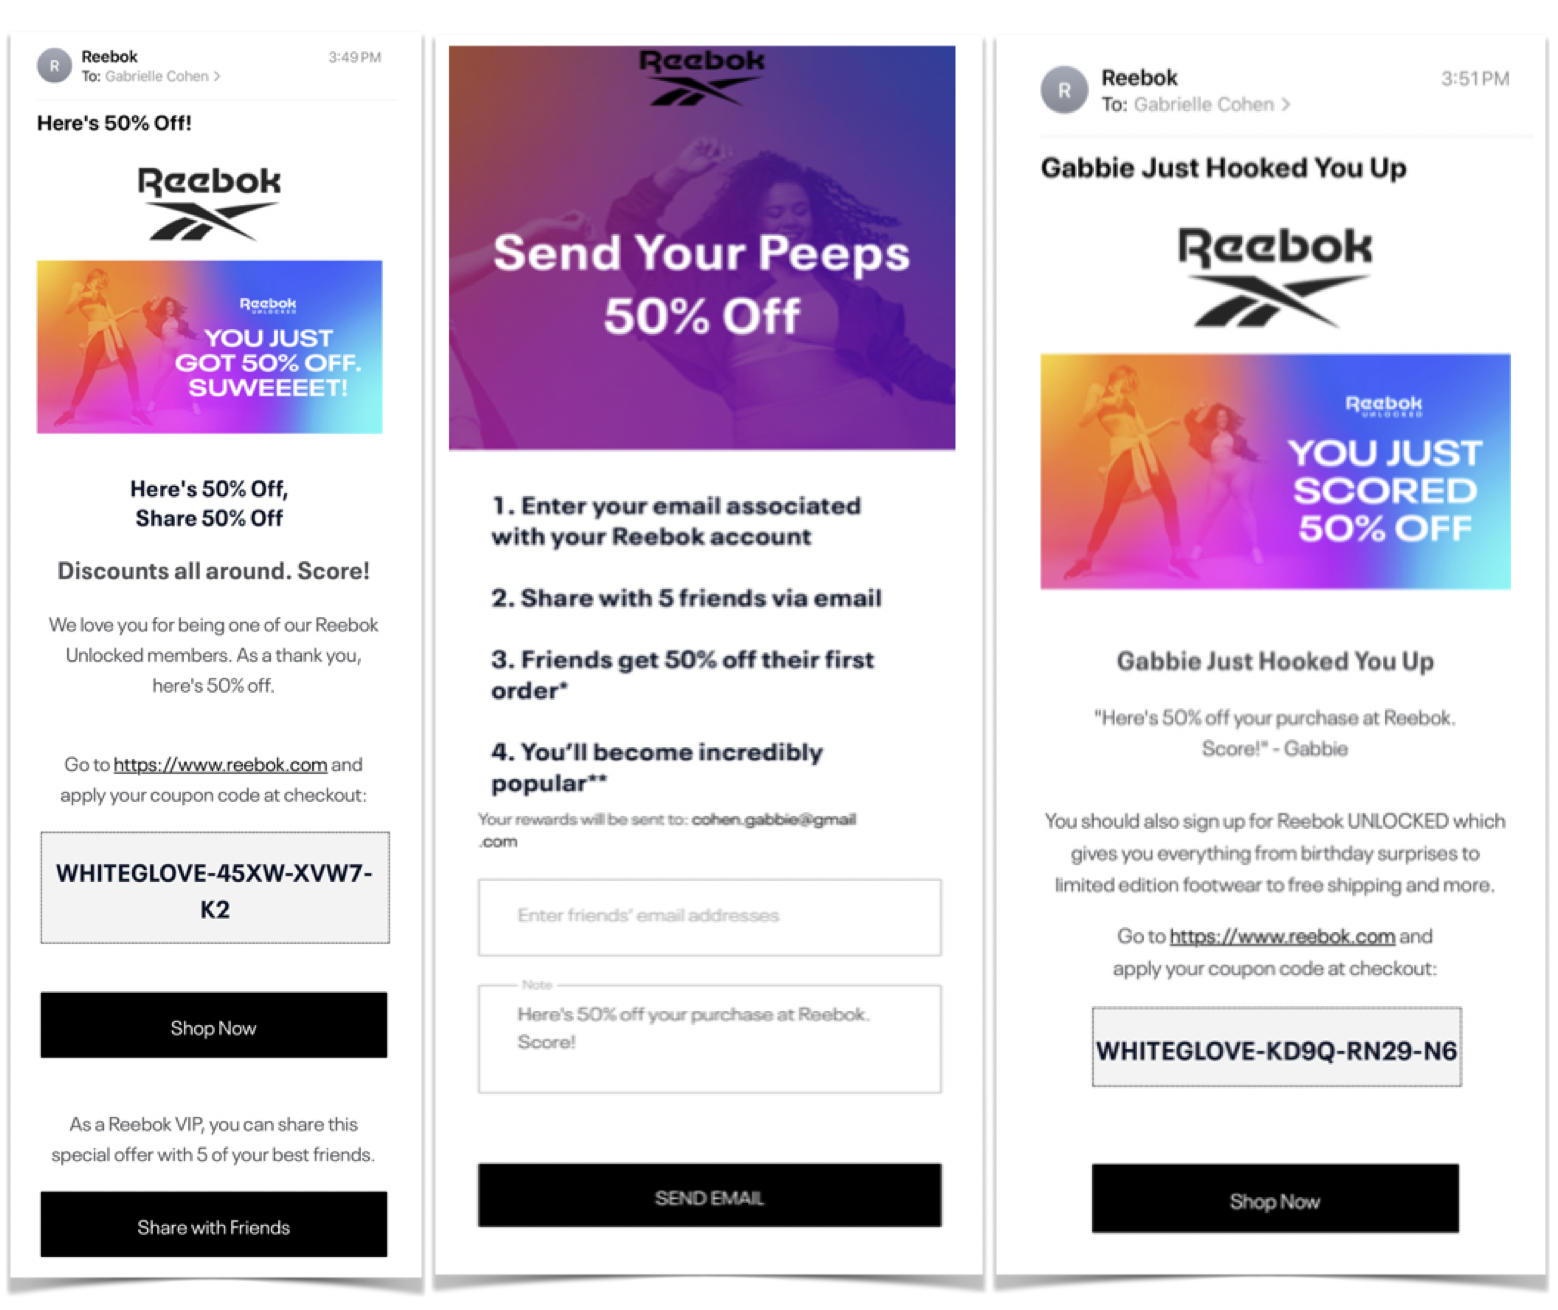 Three panels displaying web and email experiences for Reebok's Friends and Family program